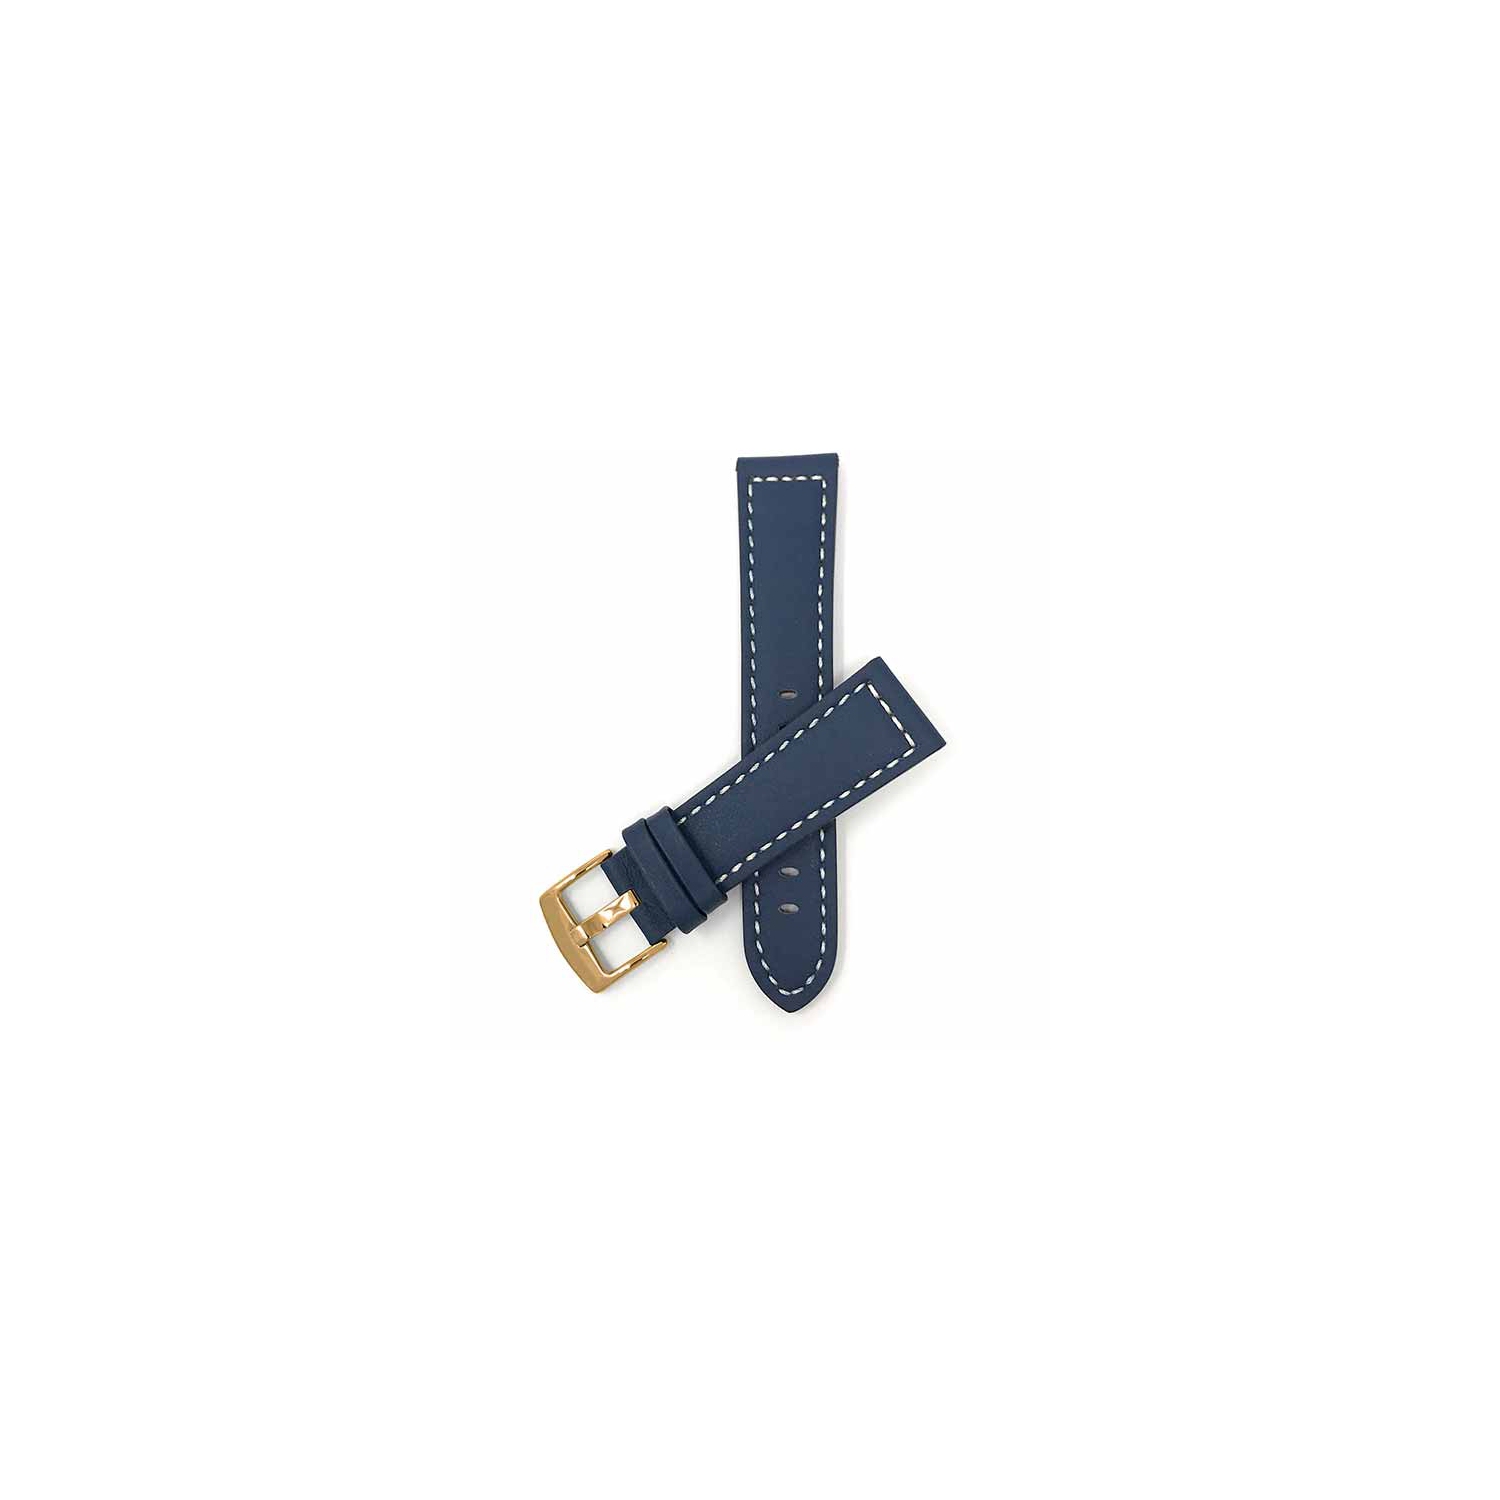 Bandini Thick Leather Racer Smartwatch Strap, White Stitch For Michael Kors MKGO - 20mm, Blue / Gold Buckle